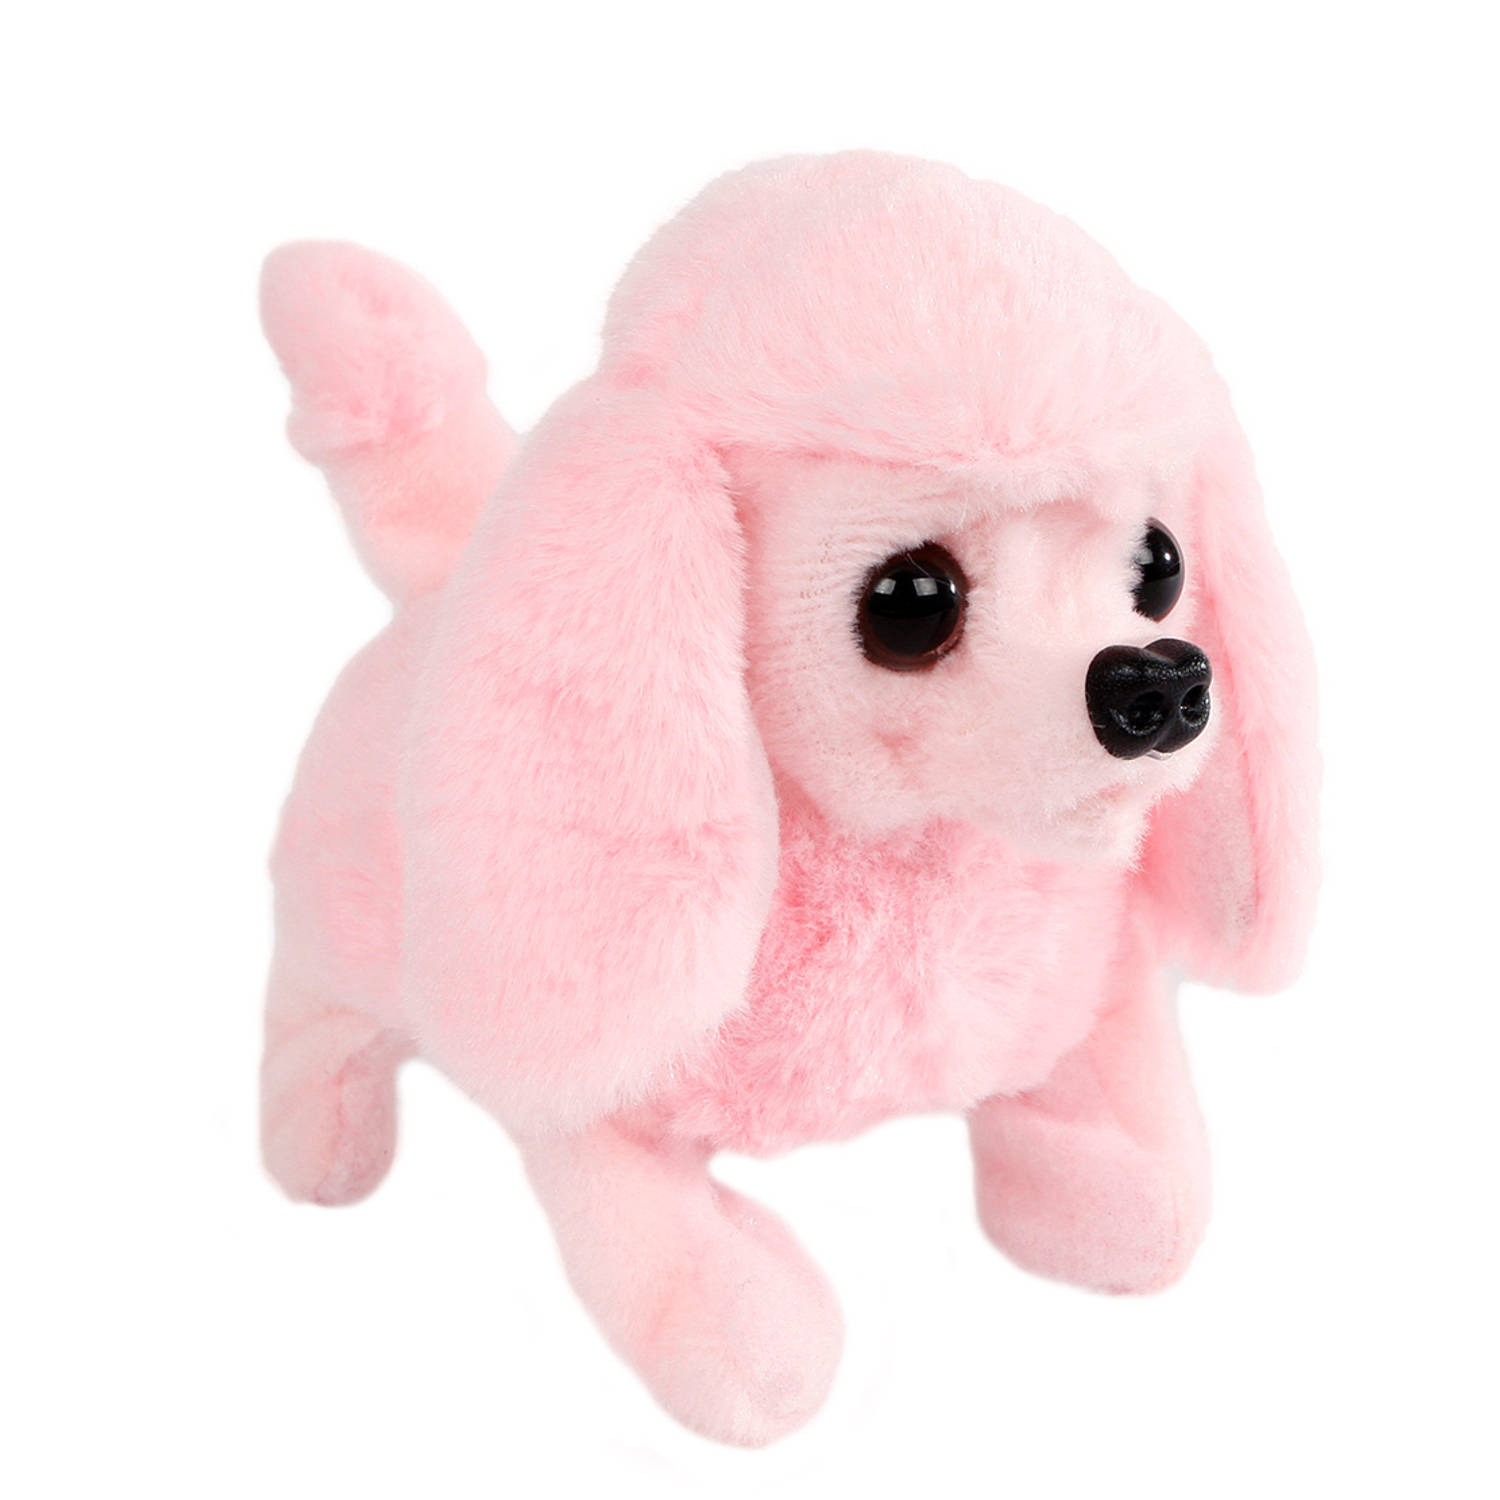 Take Me Home loophond junior pluche 15,5 cm roze